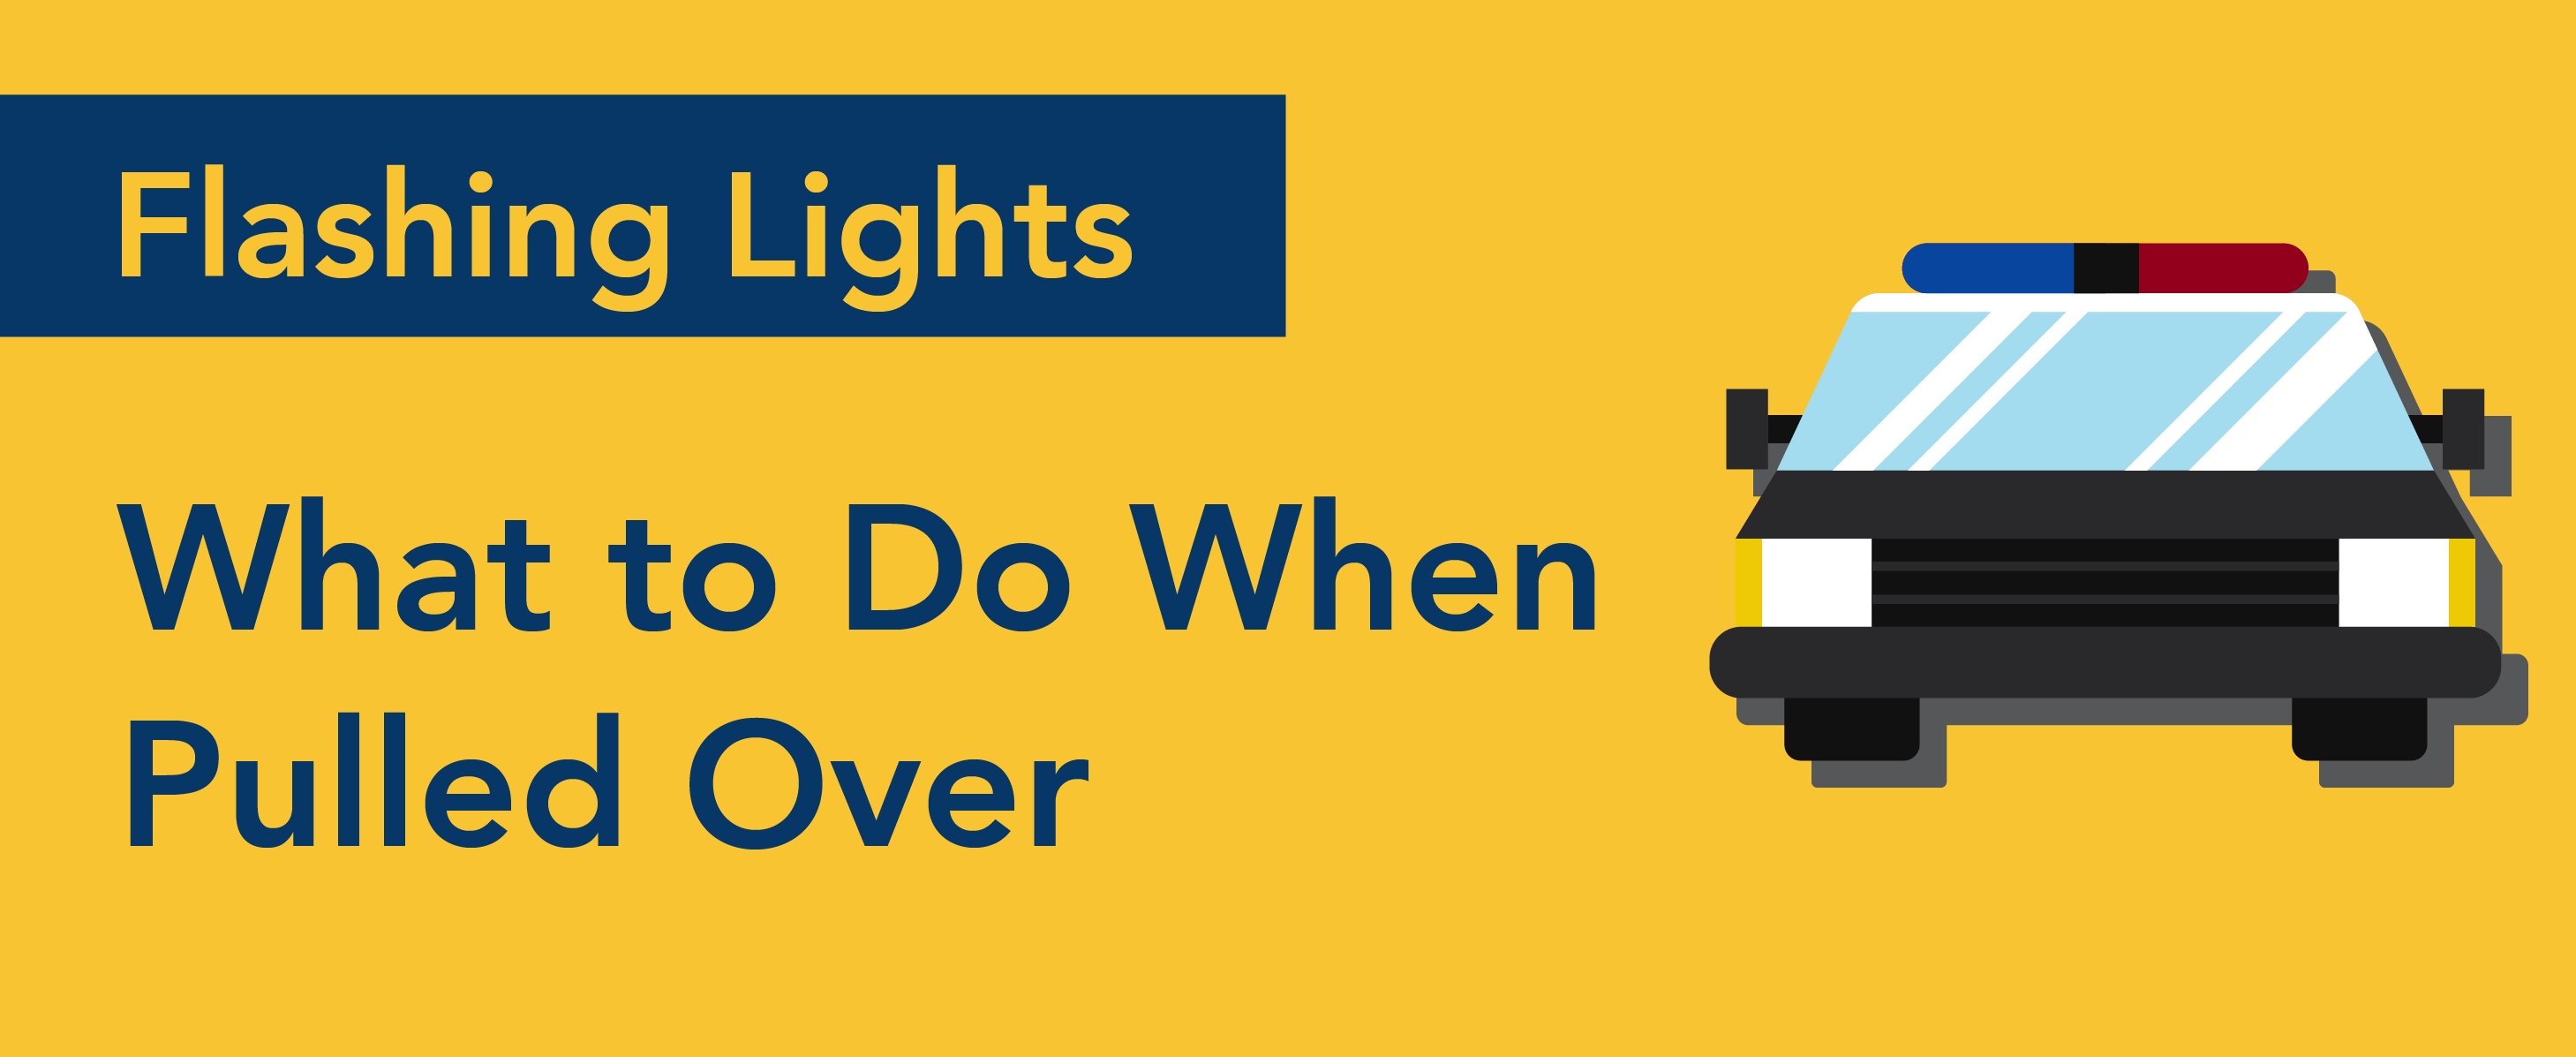 Flashing lights: what to do when pulled over